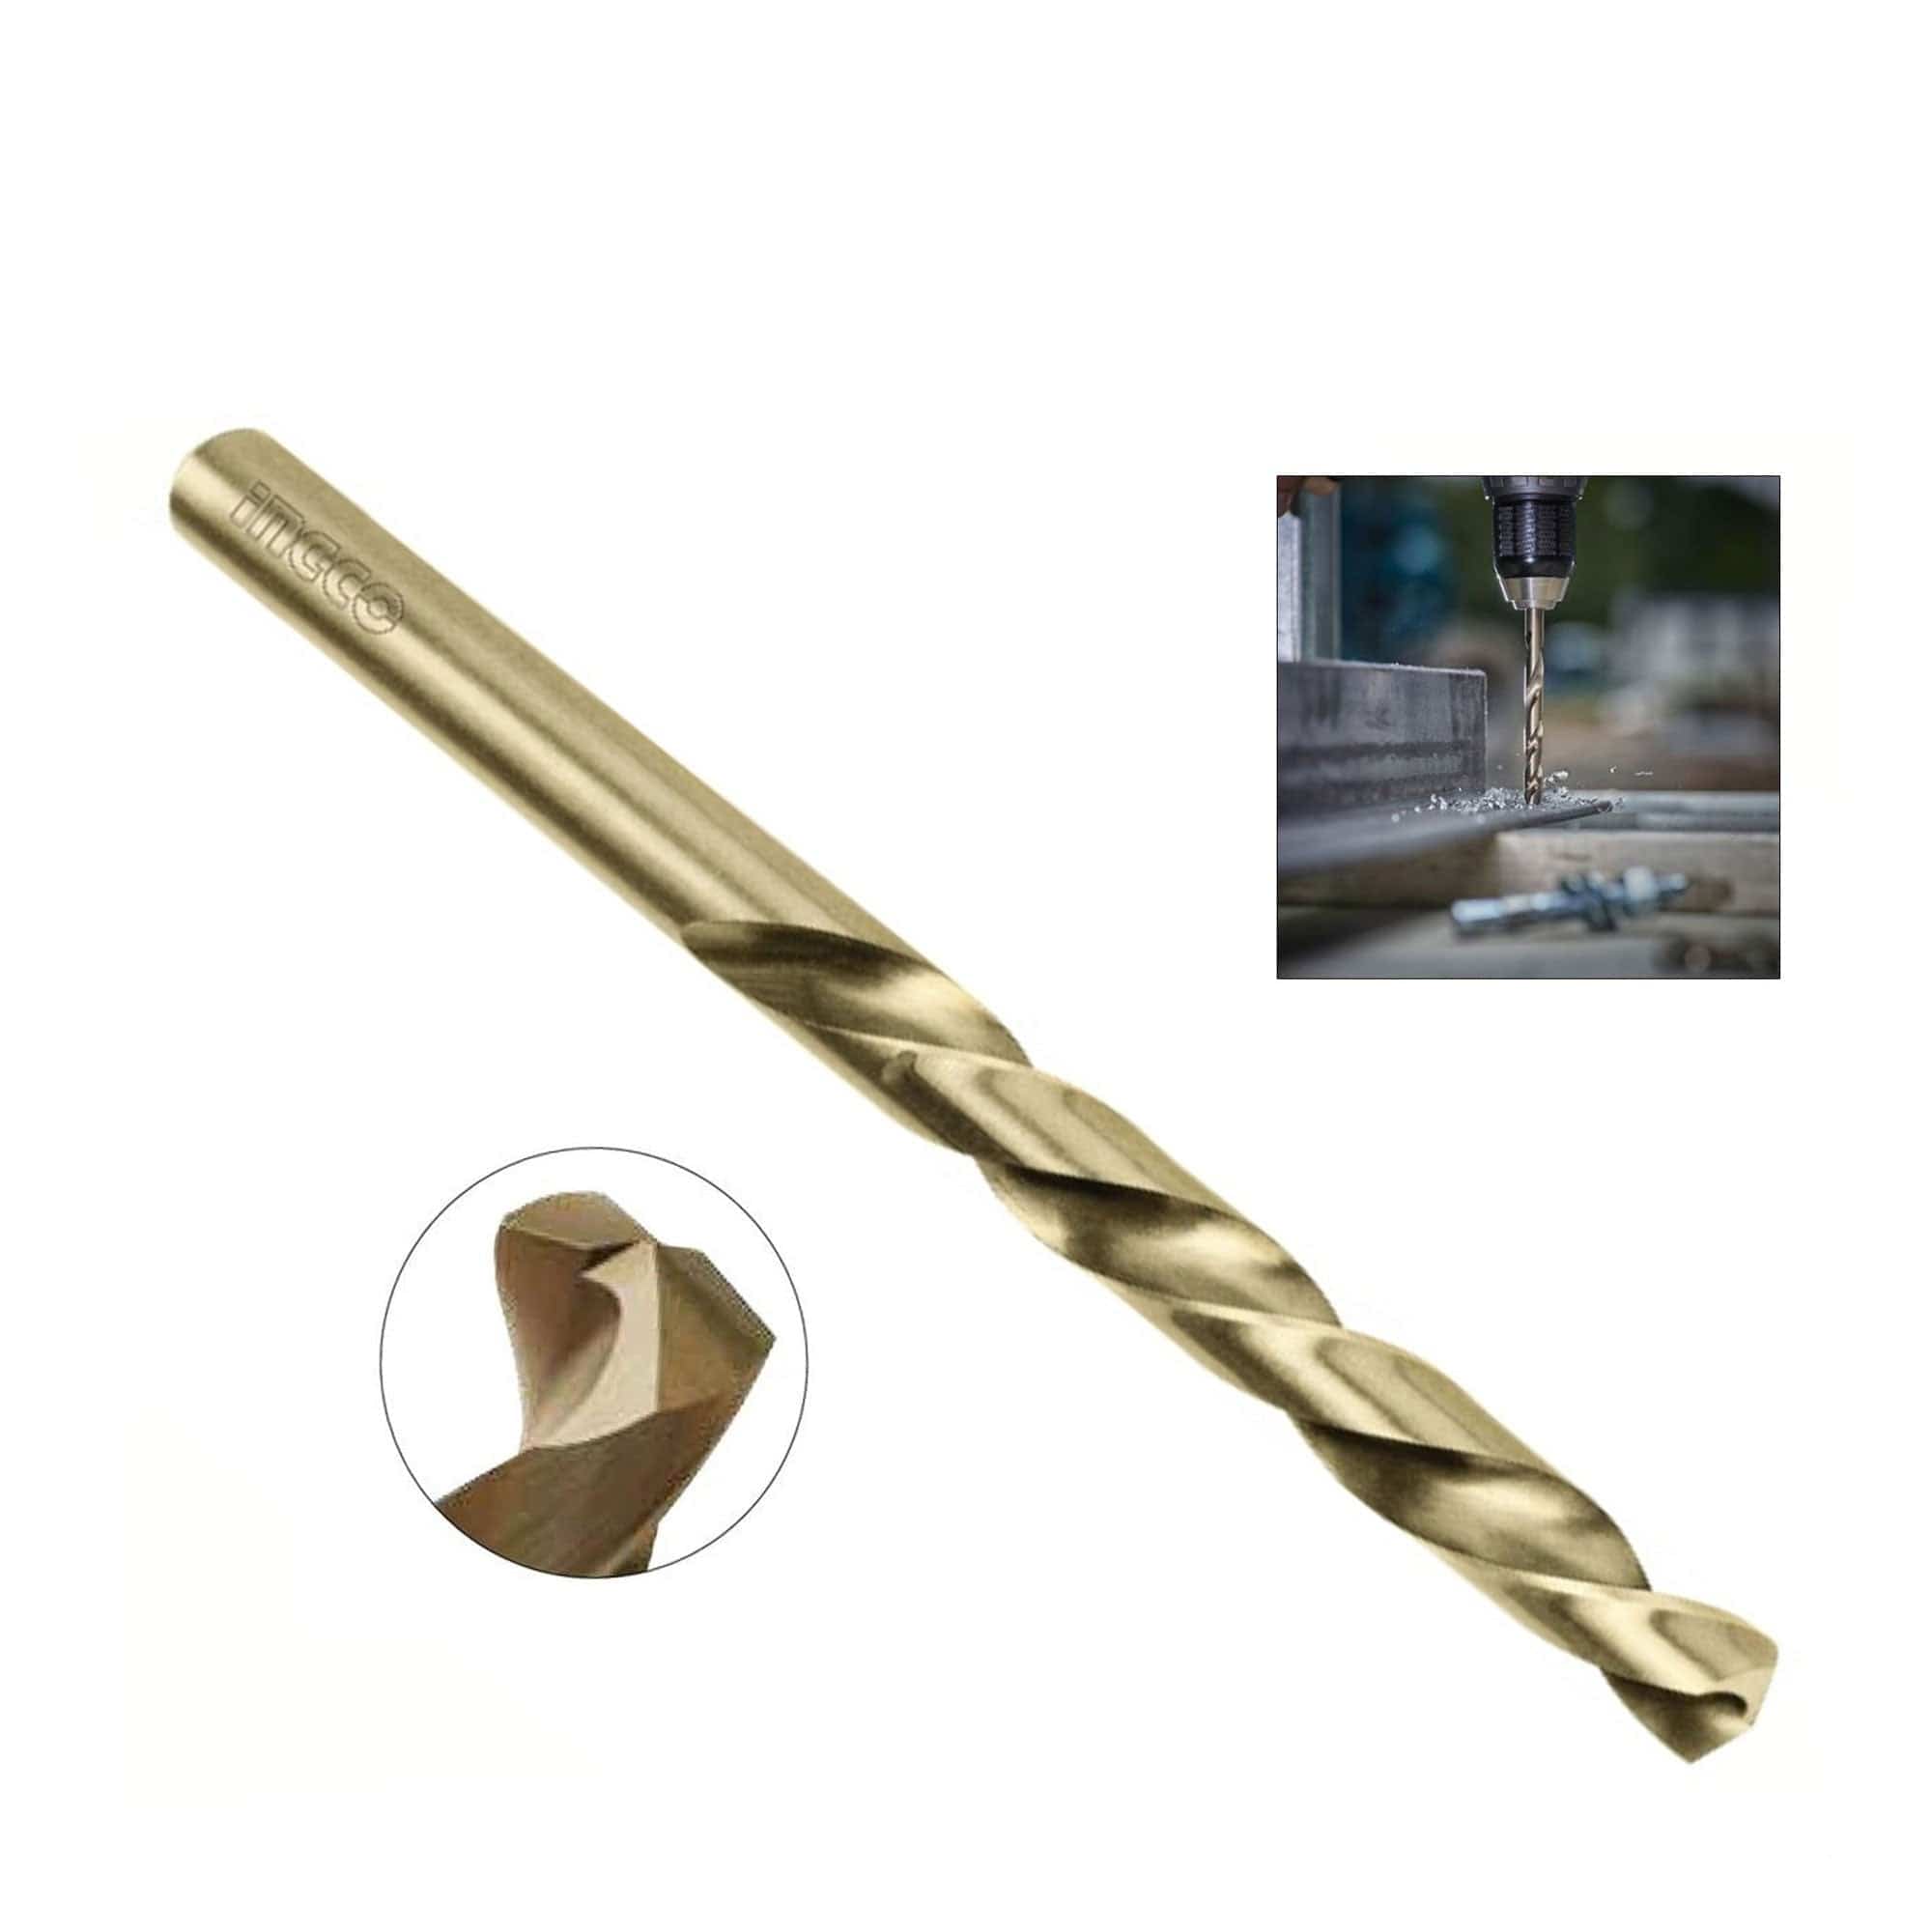 Ingco Metal HSS Drill Bit | Buy Online in Accra, Ghana - Supply Master Drill Bits Buy Tools hardware Building materials